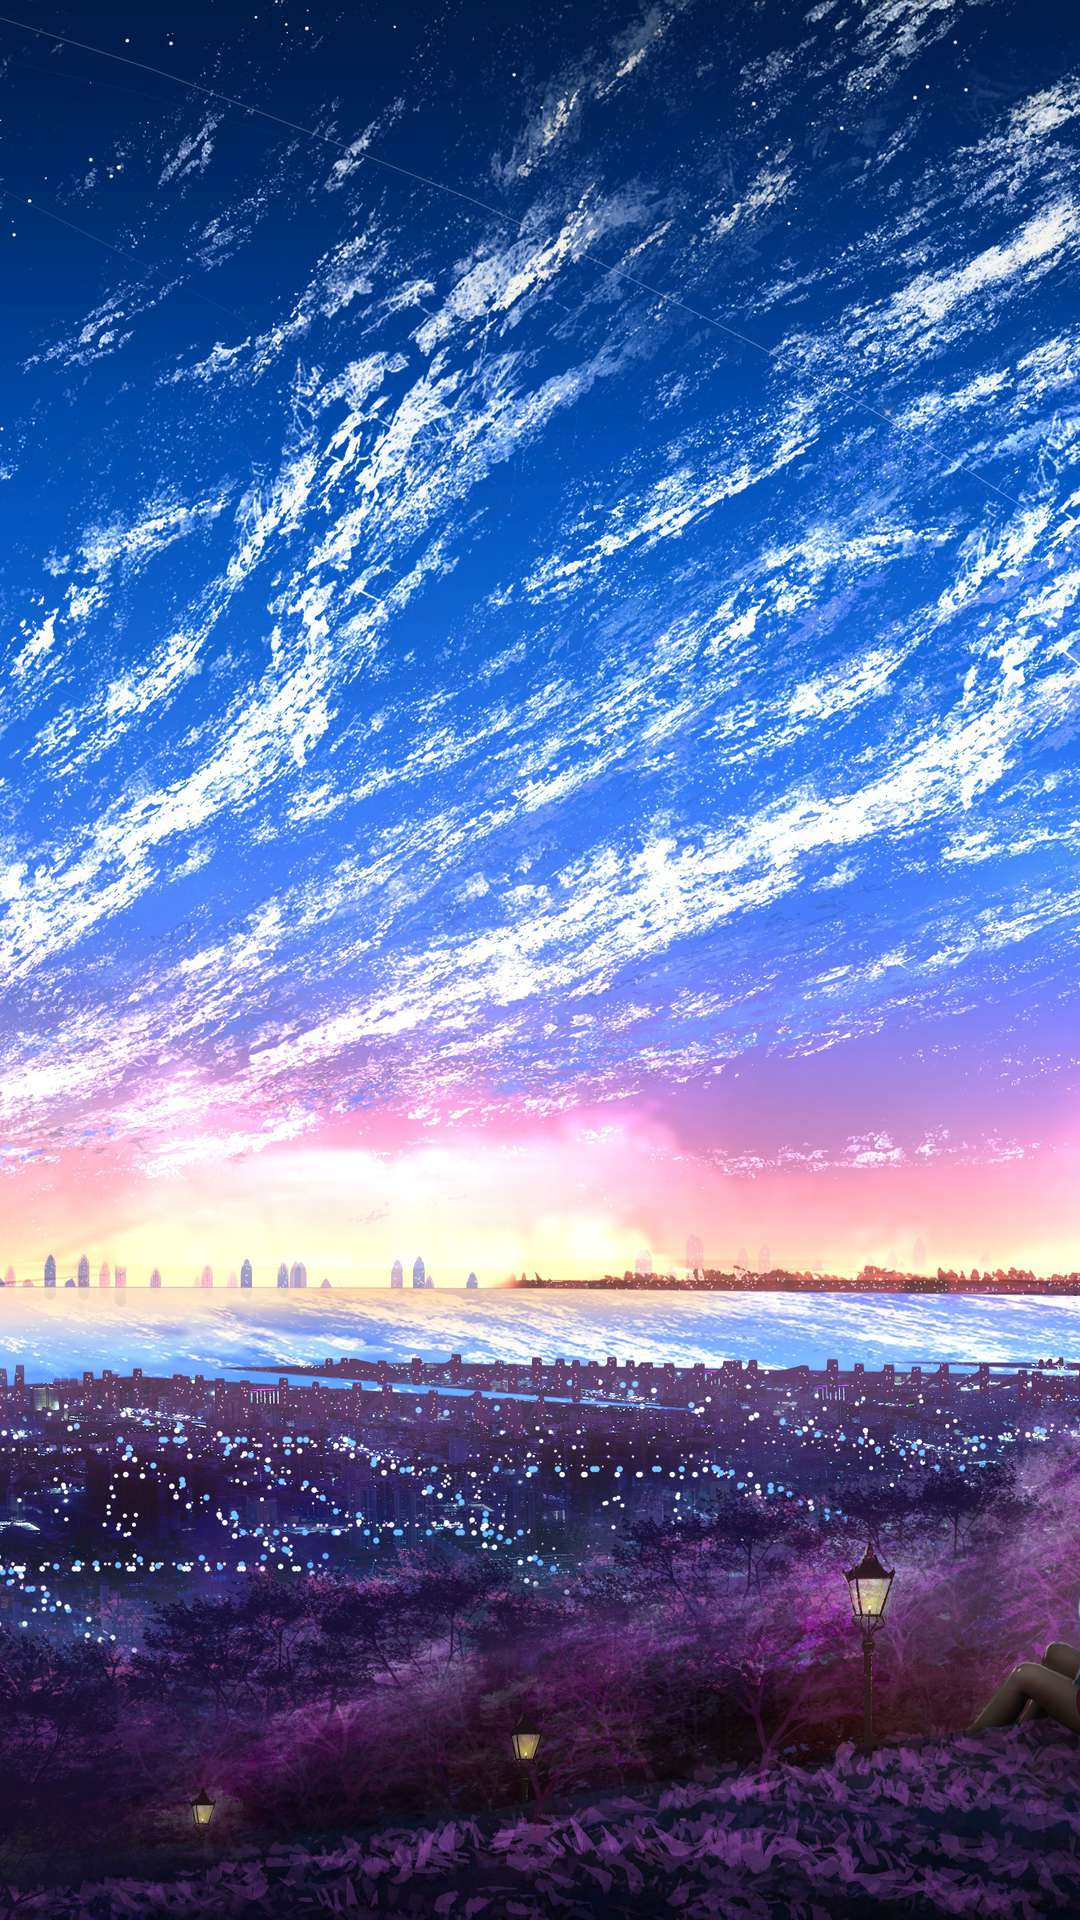 2230 Anime Wallpaper Stock Video Footage  4K and HD Video Clips   Shutterstock